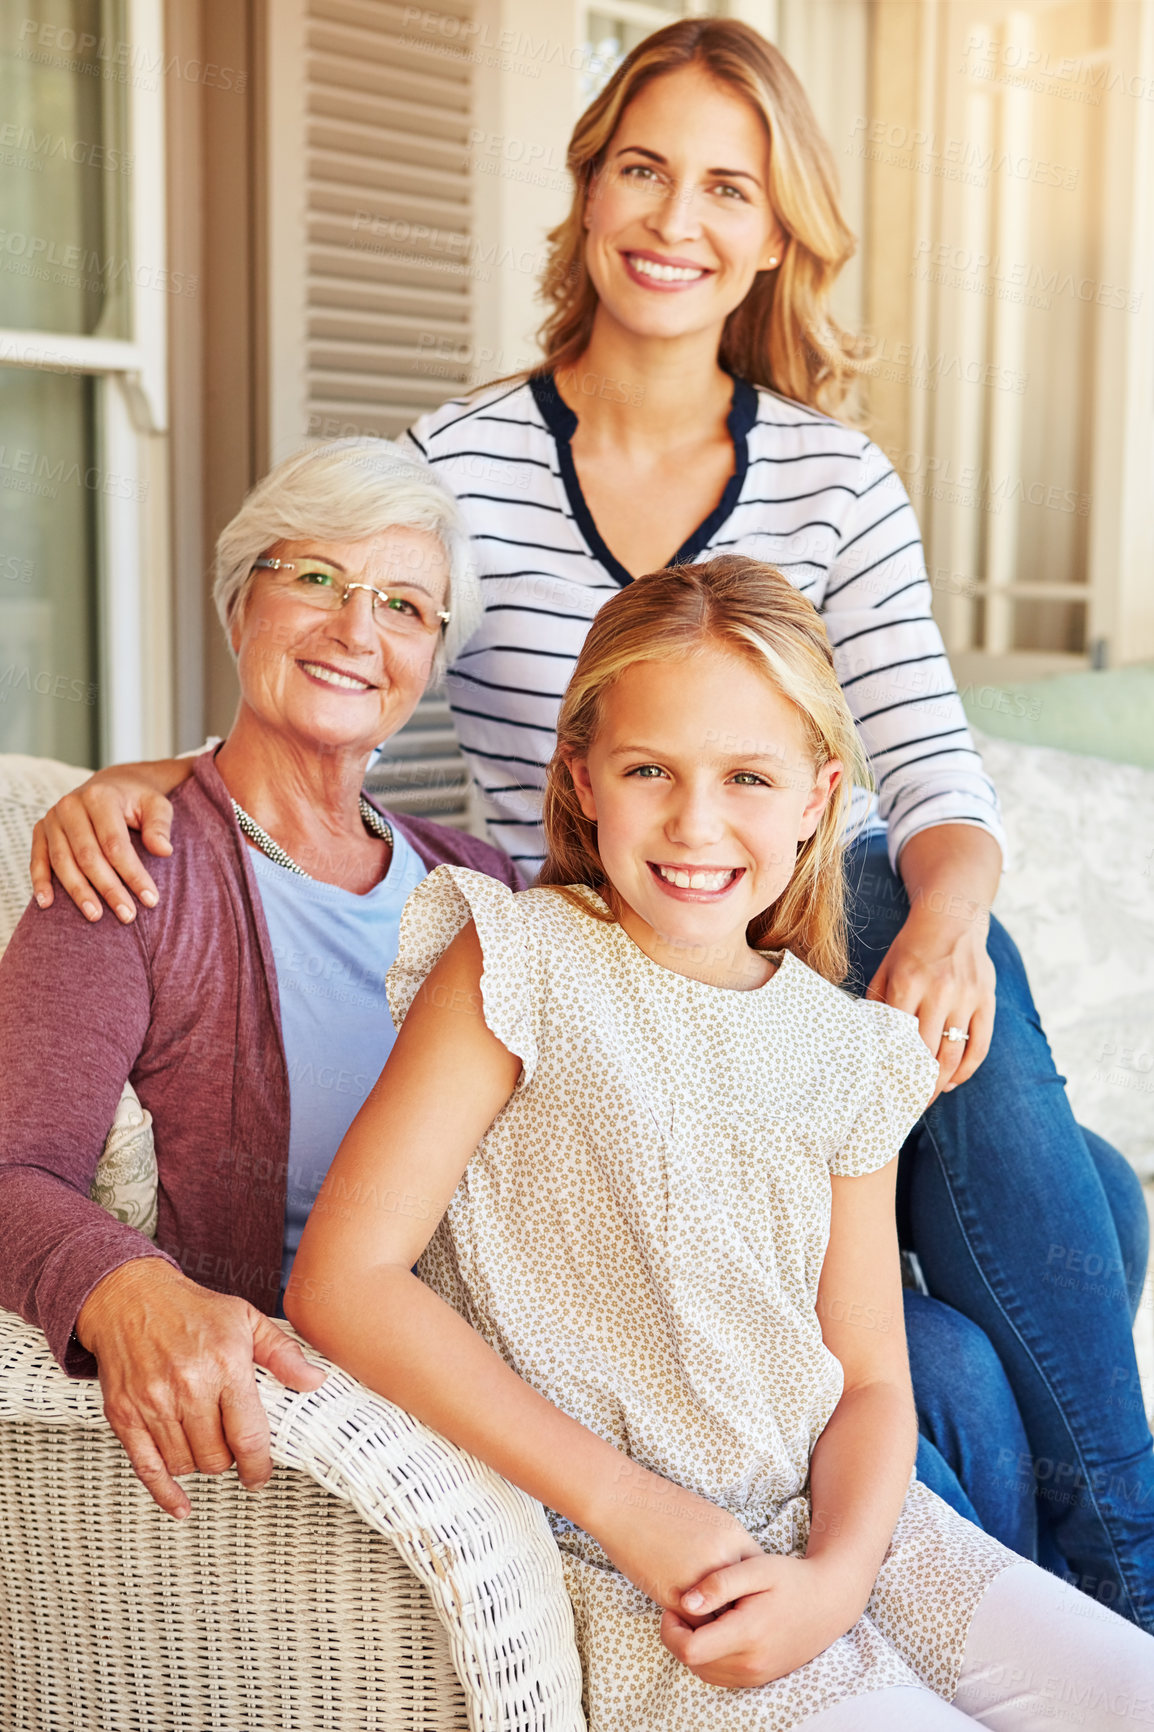 Buy stock photo Cropped portrait of a young girl sitting outside with her mother and grandmother